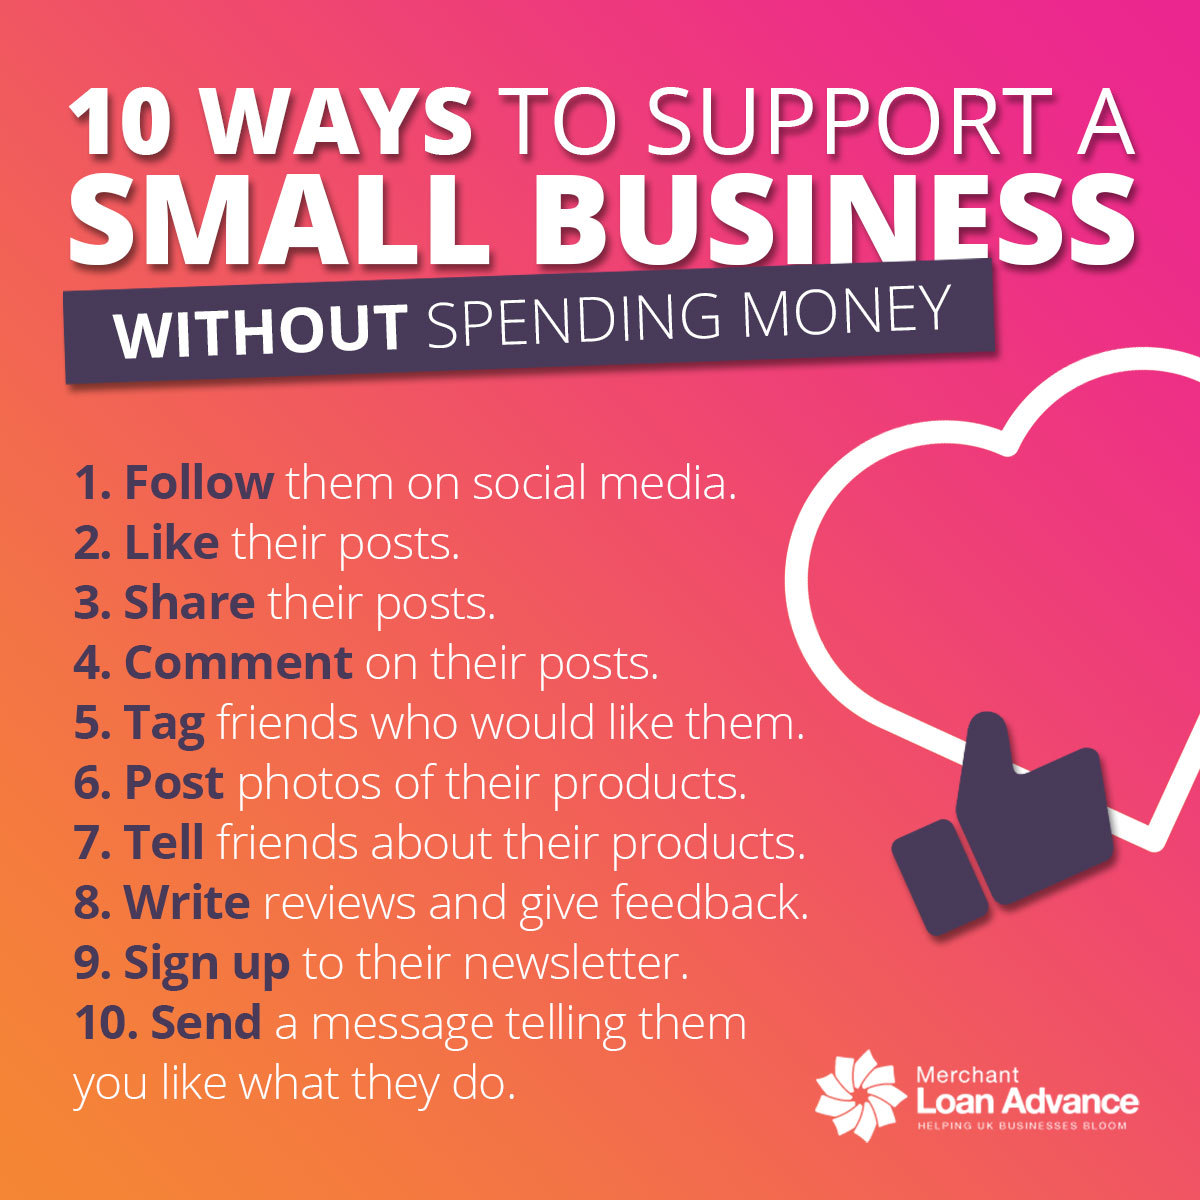 10 simple ways to support a small business without spending money